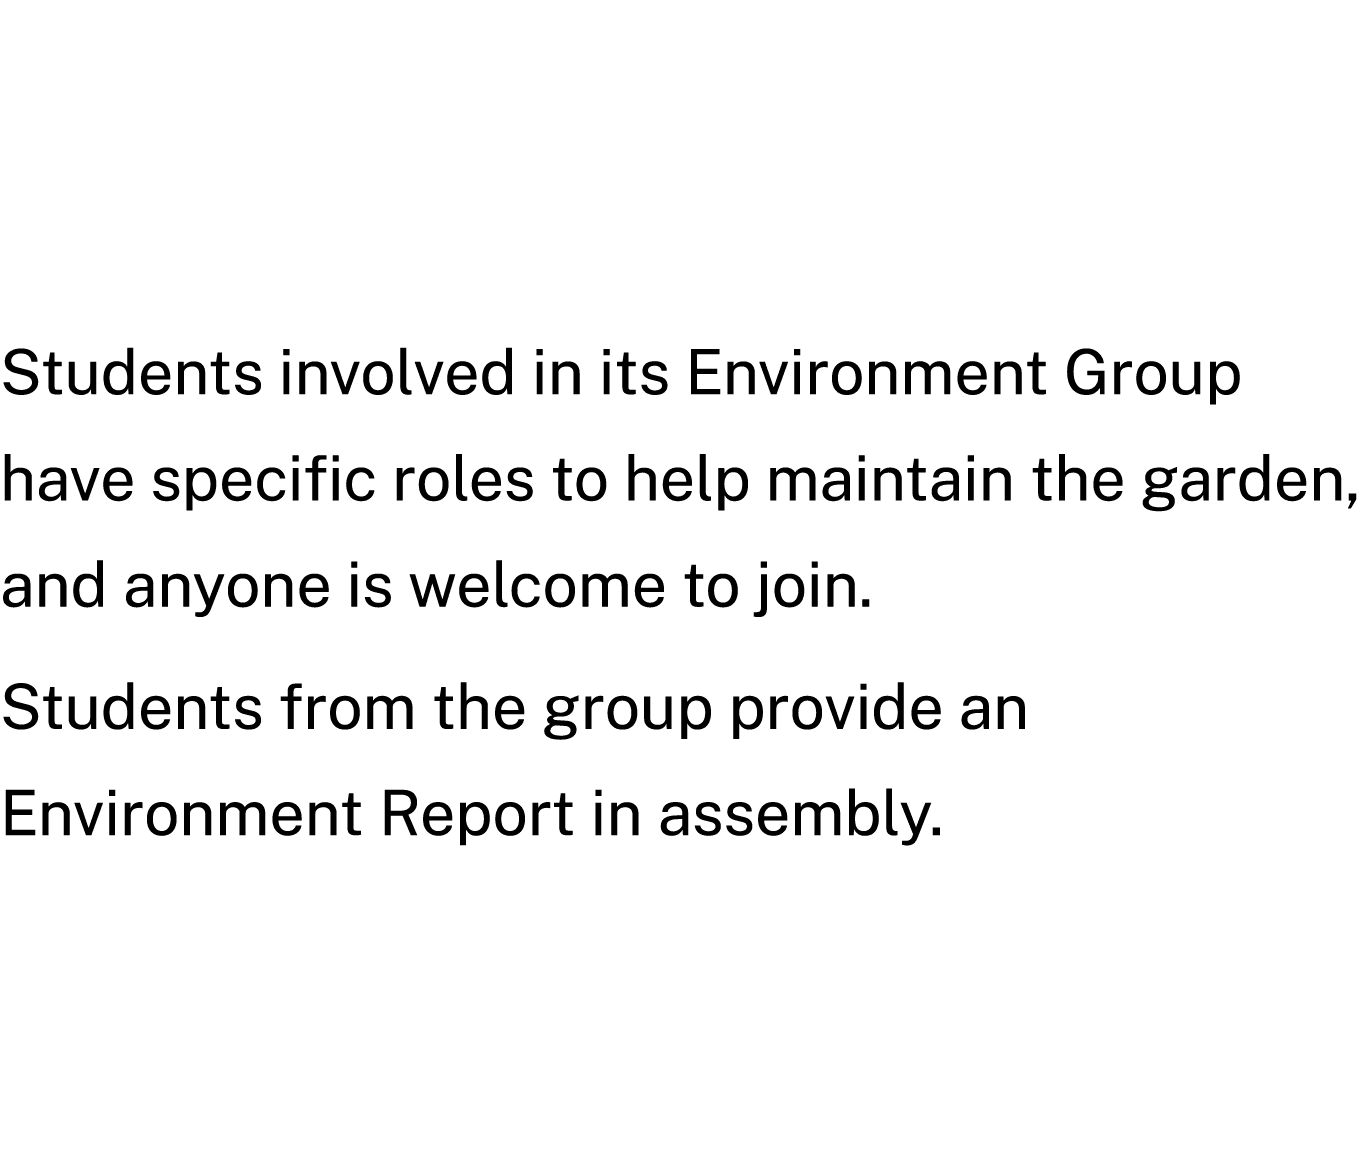 Students involved in its Environment Group have specific roles to help maintain the garden, and anyone is welcome to ...